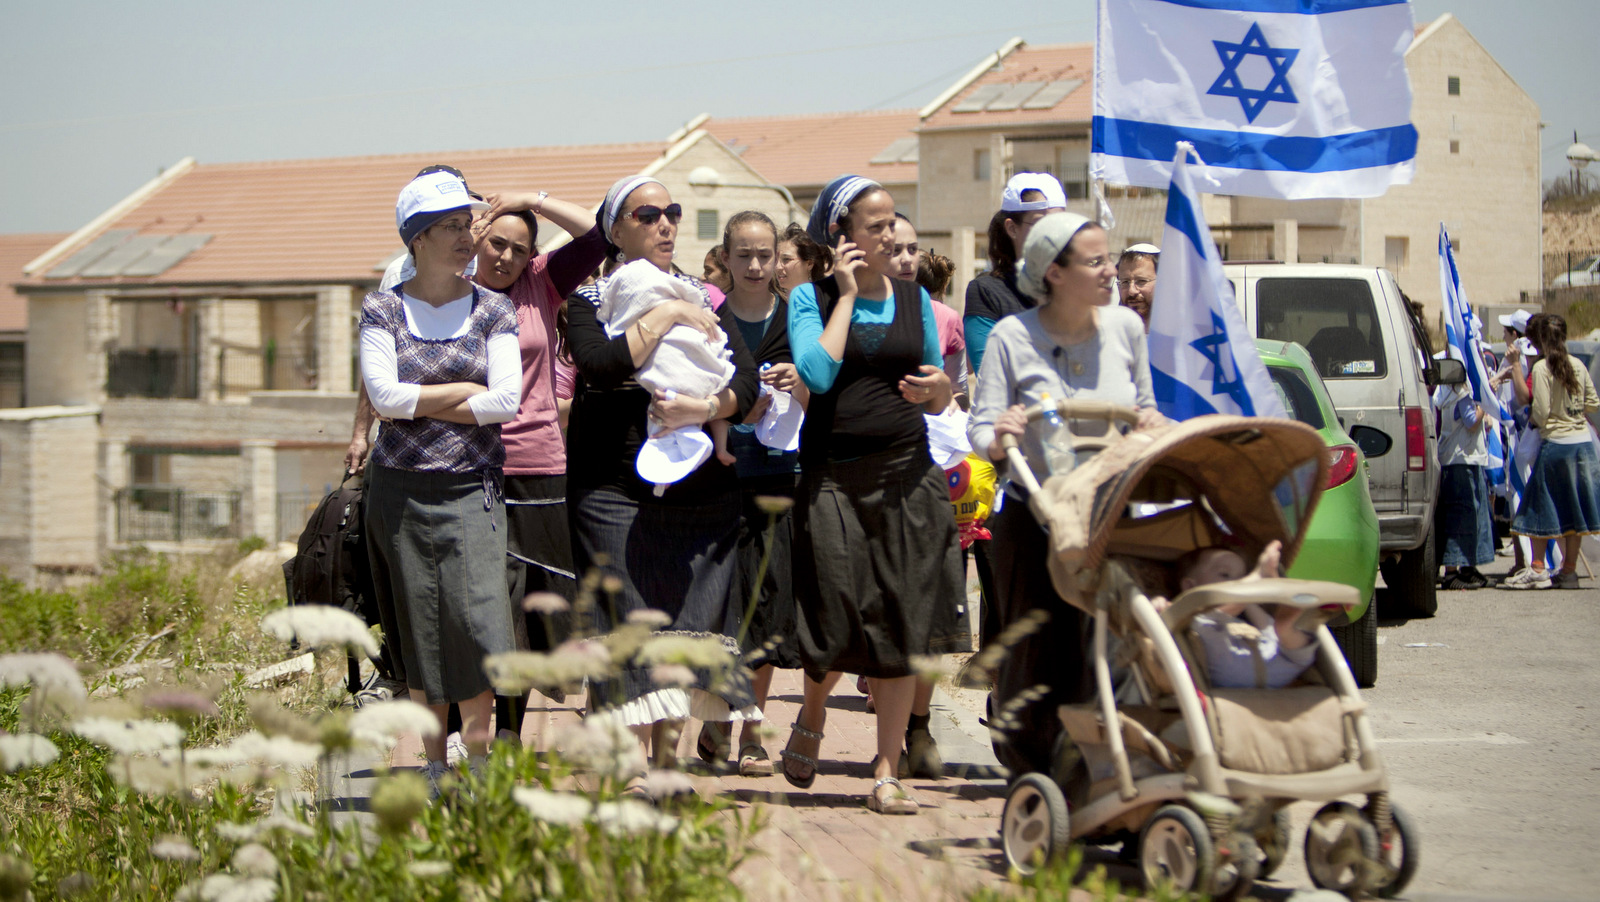 Jewish settlers march during a demonstration against the proposed decision to evacuate a West Bank outpost in the Ulpana neighborhood, in the West Bank settlement of Beit El near the Palestinians city of Ramallah. (AP/Ariel Schalit)